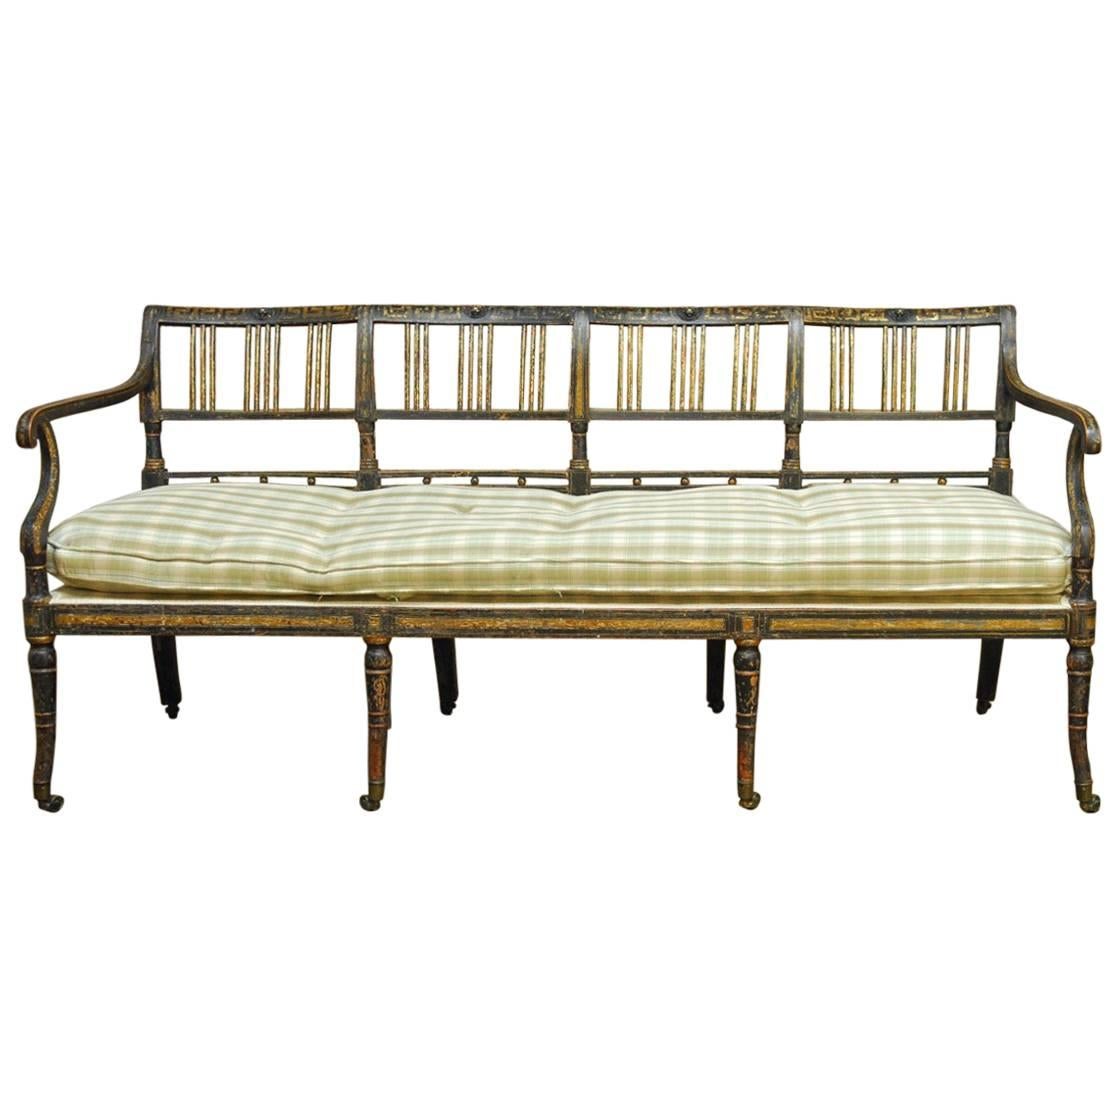 19th Century English Regency Painted and Parcel-Gilt Bench Settee